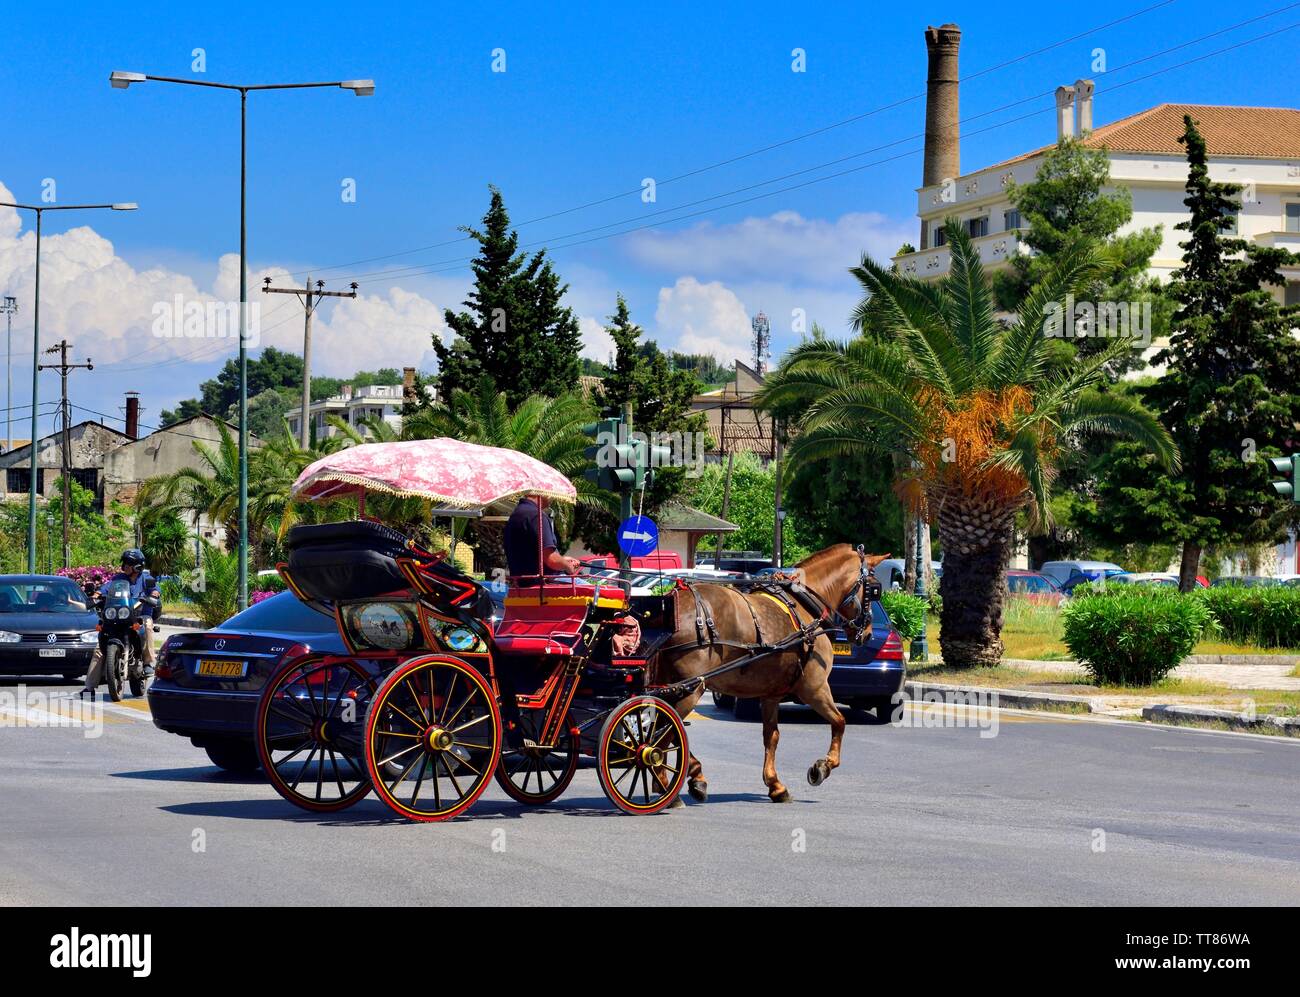 Tourists riding a horse drawn carriage,into Corfu town,with road traffic,Kerkyra,Greek ionian islands,Greece Stock Photo